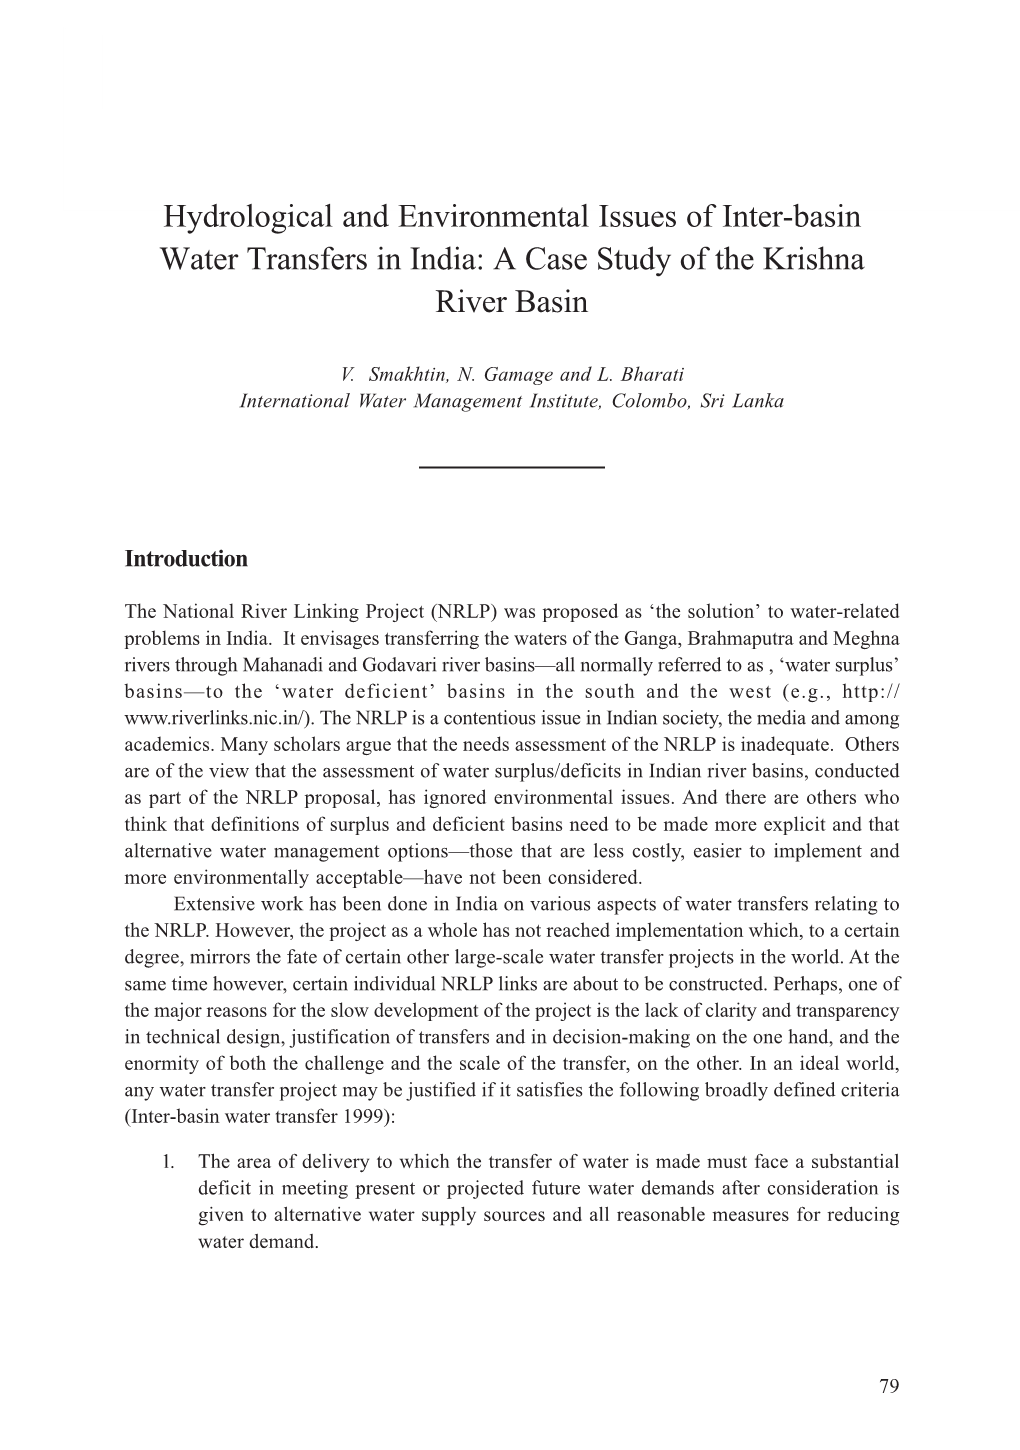 Hydrological and Environmental Issues of Inter-Basin Water Transfers in India: a Case Study of the Krishna River Basin